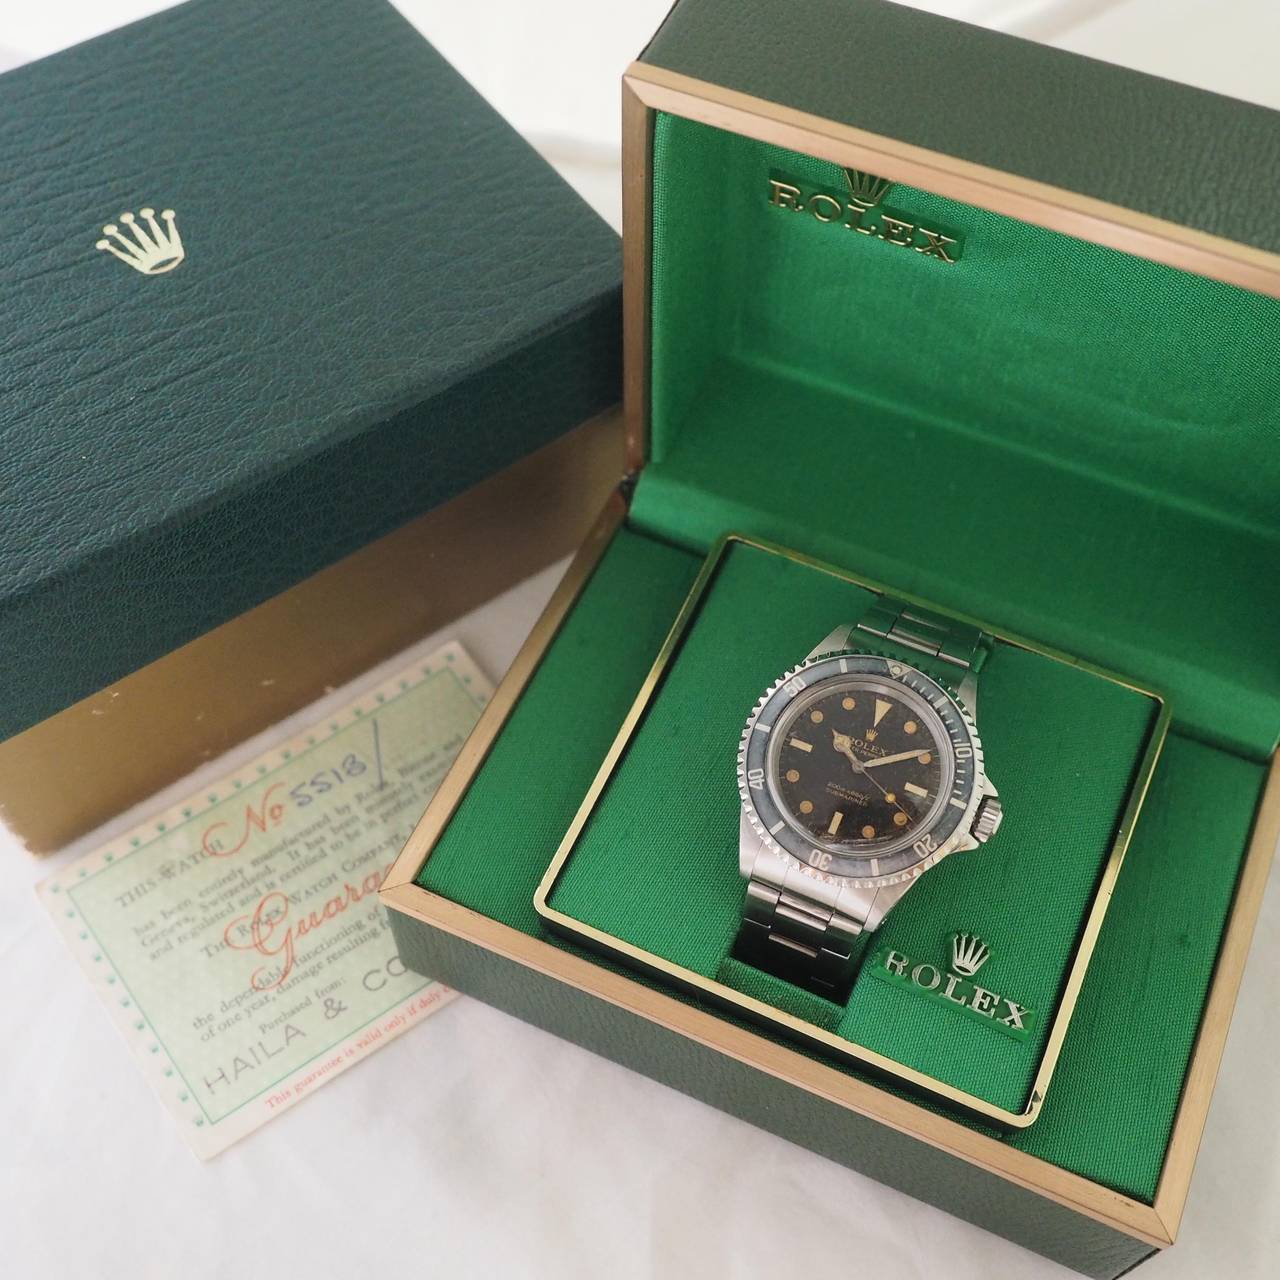 Rolex Stainless Steel Submariner Automatic Wristwatch Ref 5513 For Sale 2